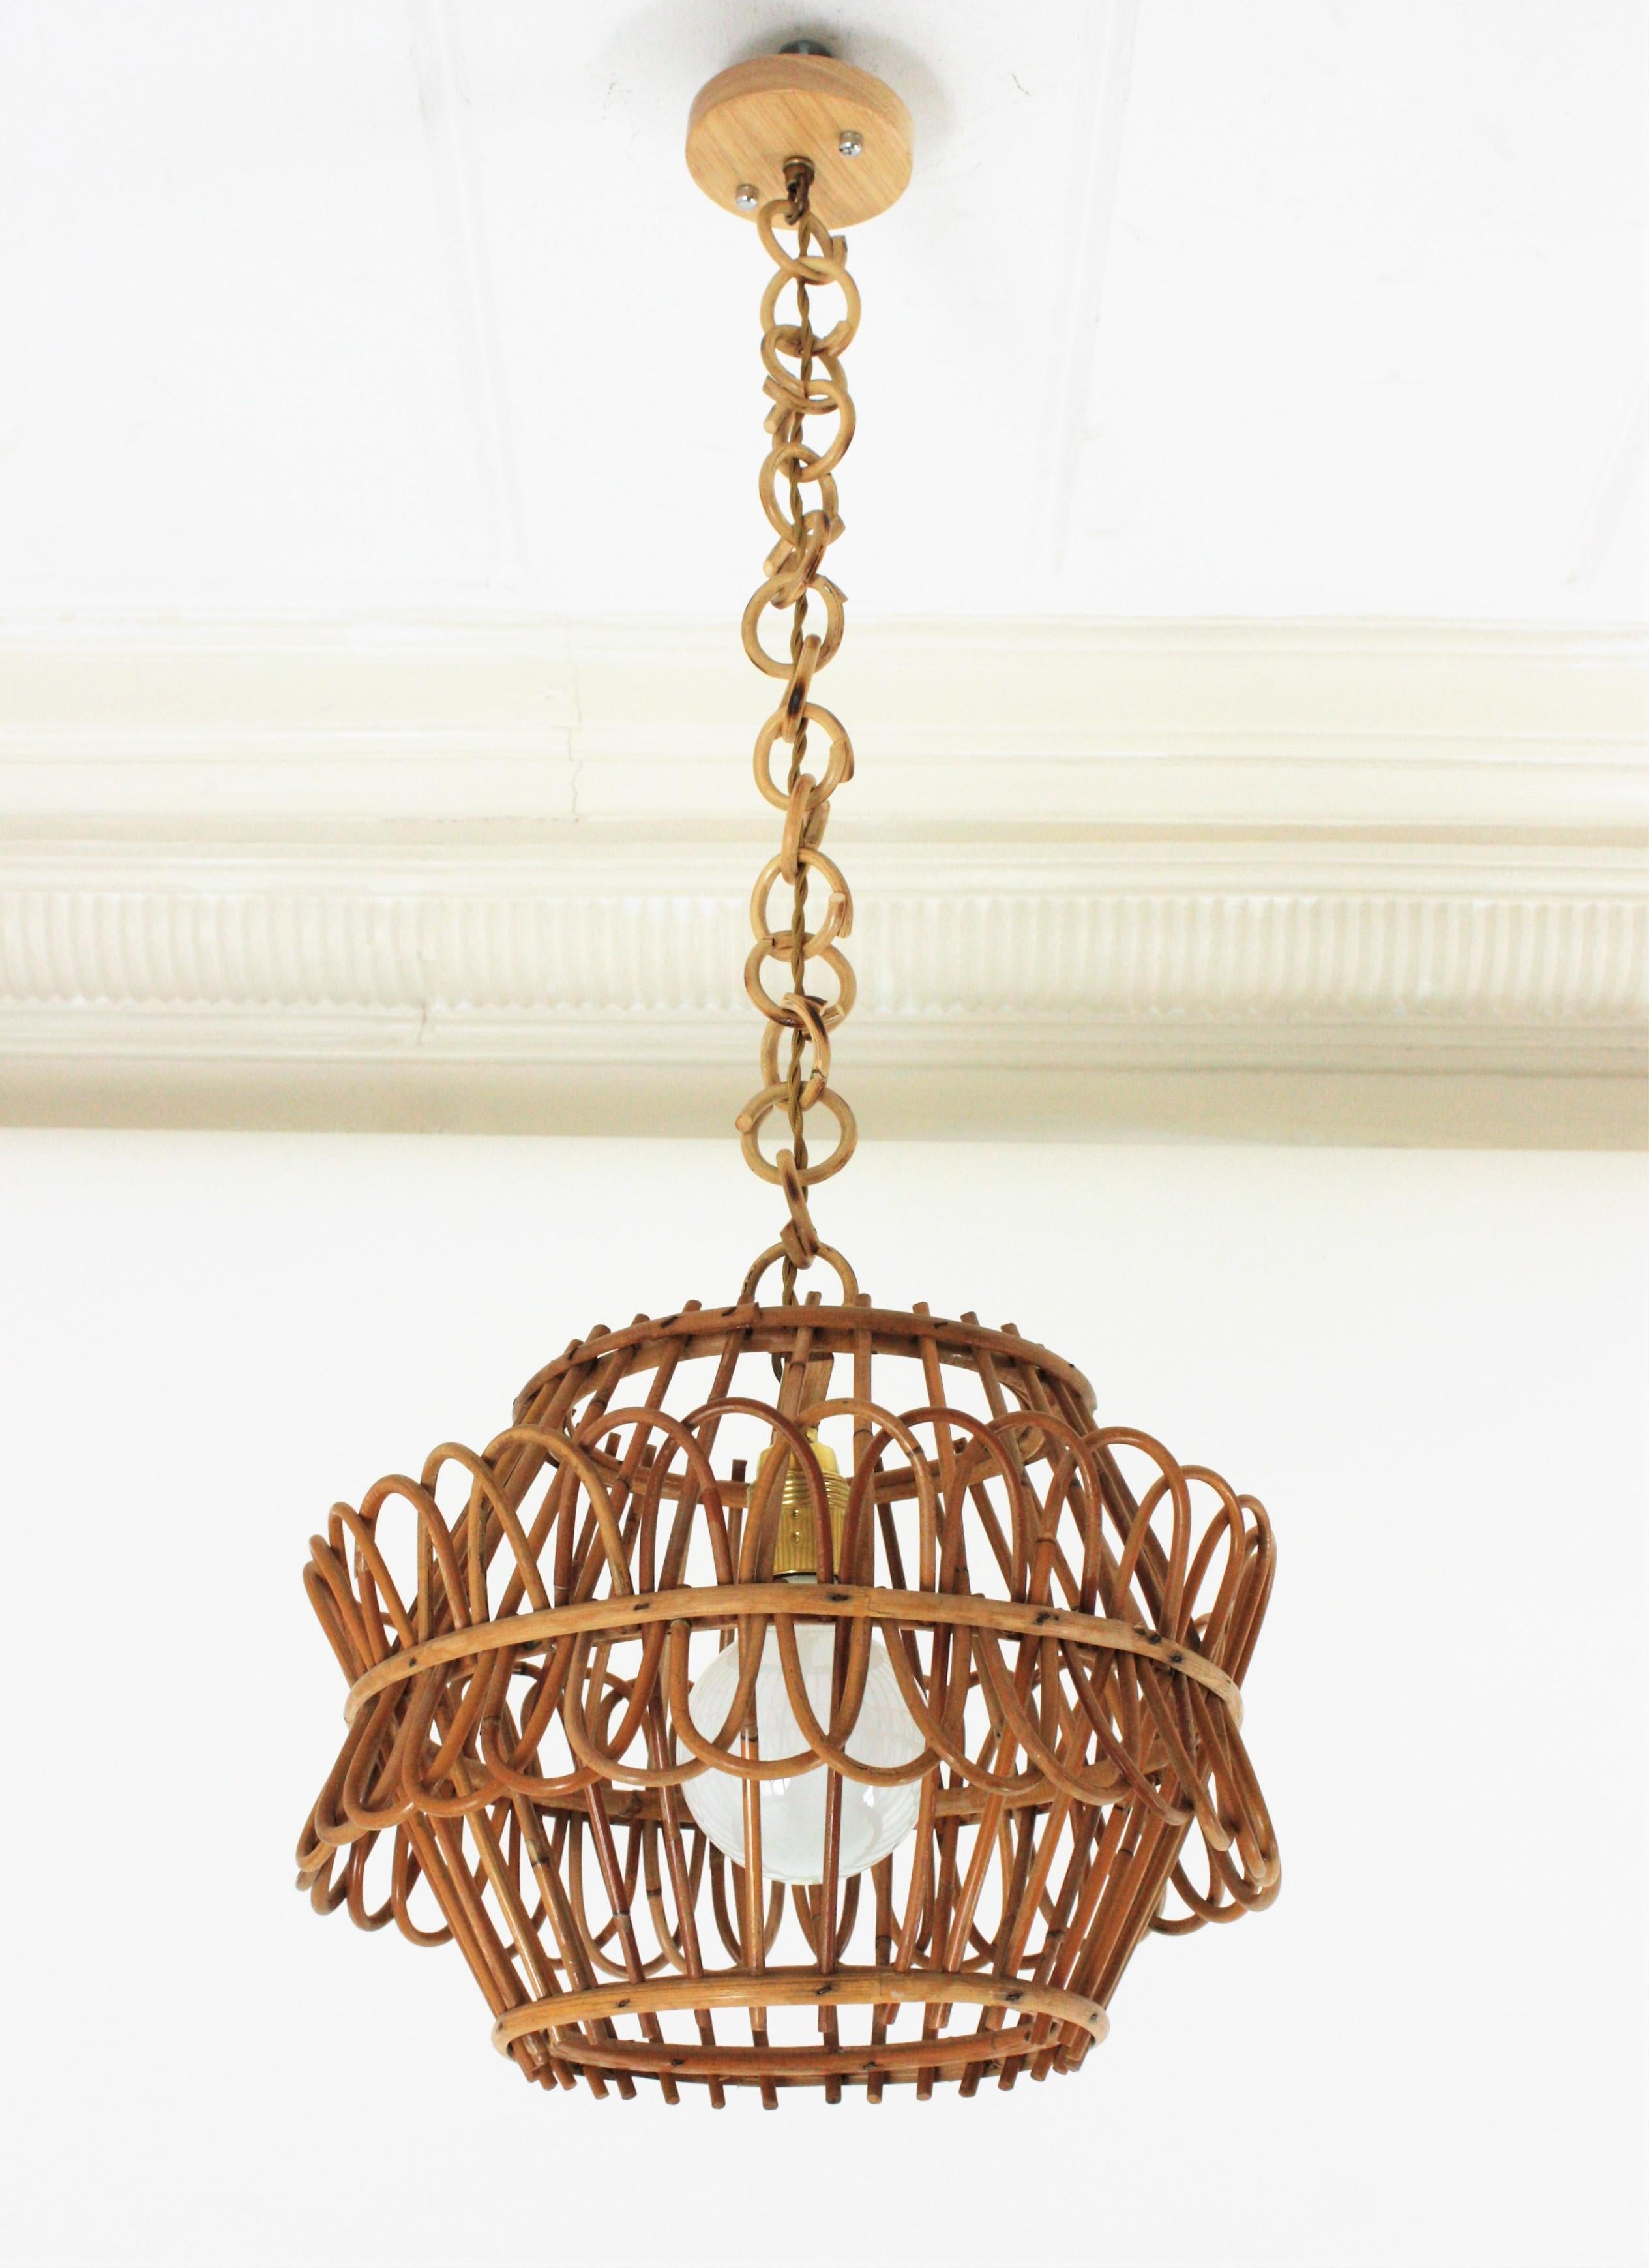 French Modernist Rattan Pagoda Pendant Lamp or Lantern. France, 1950s.
This eye-catching rattan chandelier features a pagoda shape rattan hanging lamp with oriental inspired design. The lampshade is made of an intricate of rattan canes and it hangs